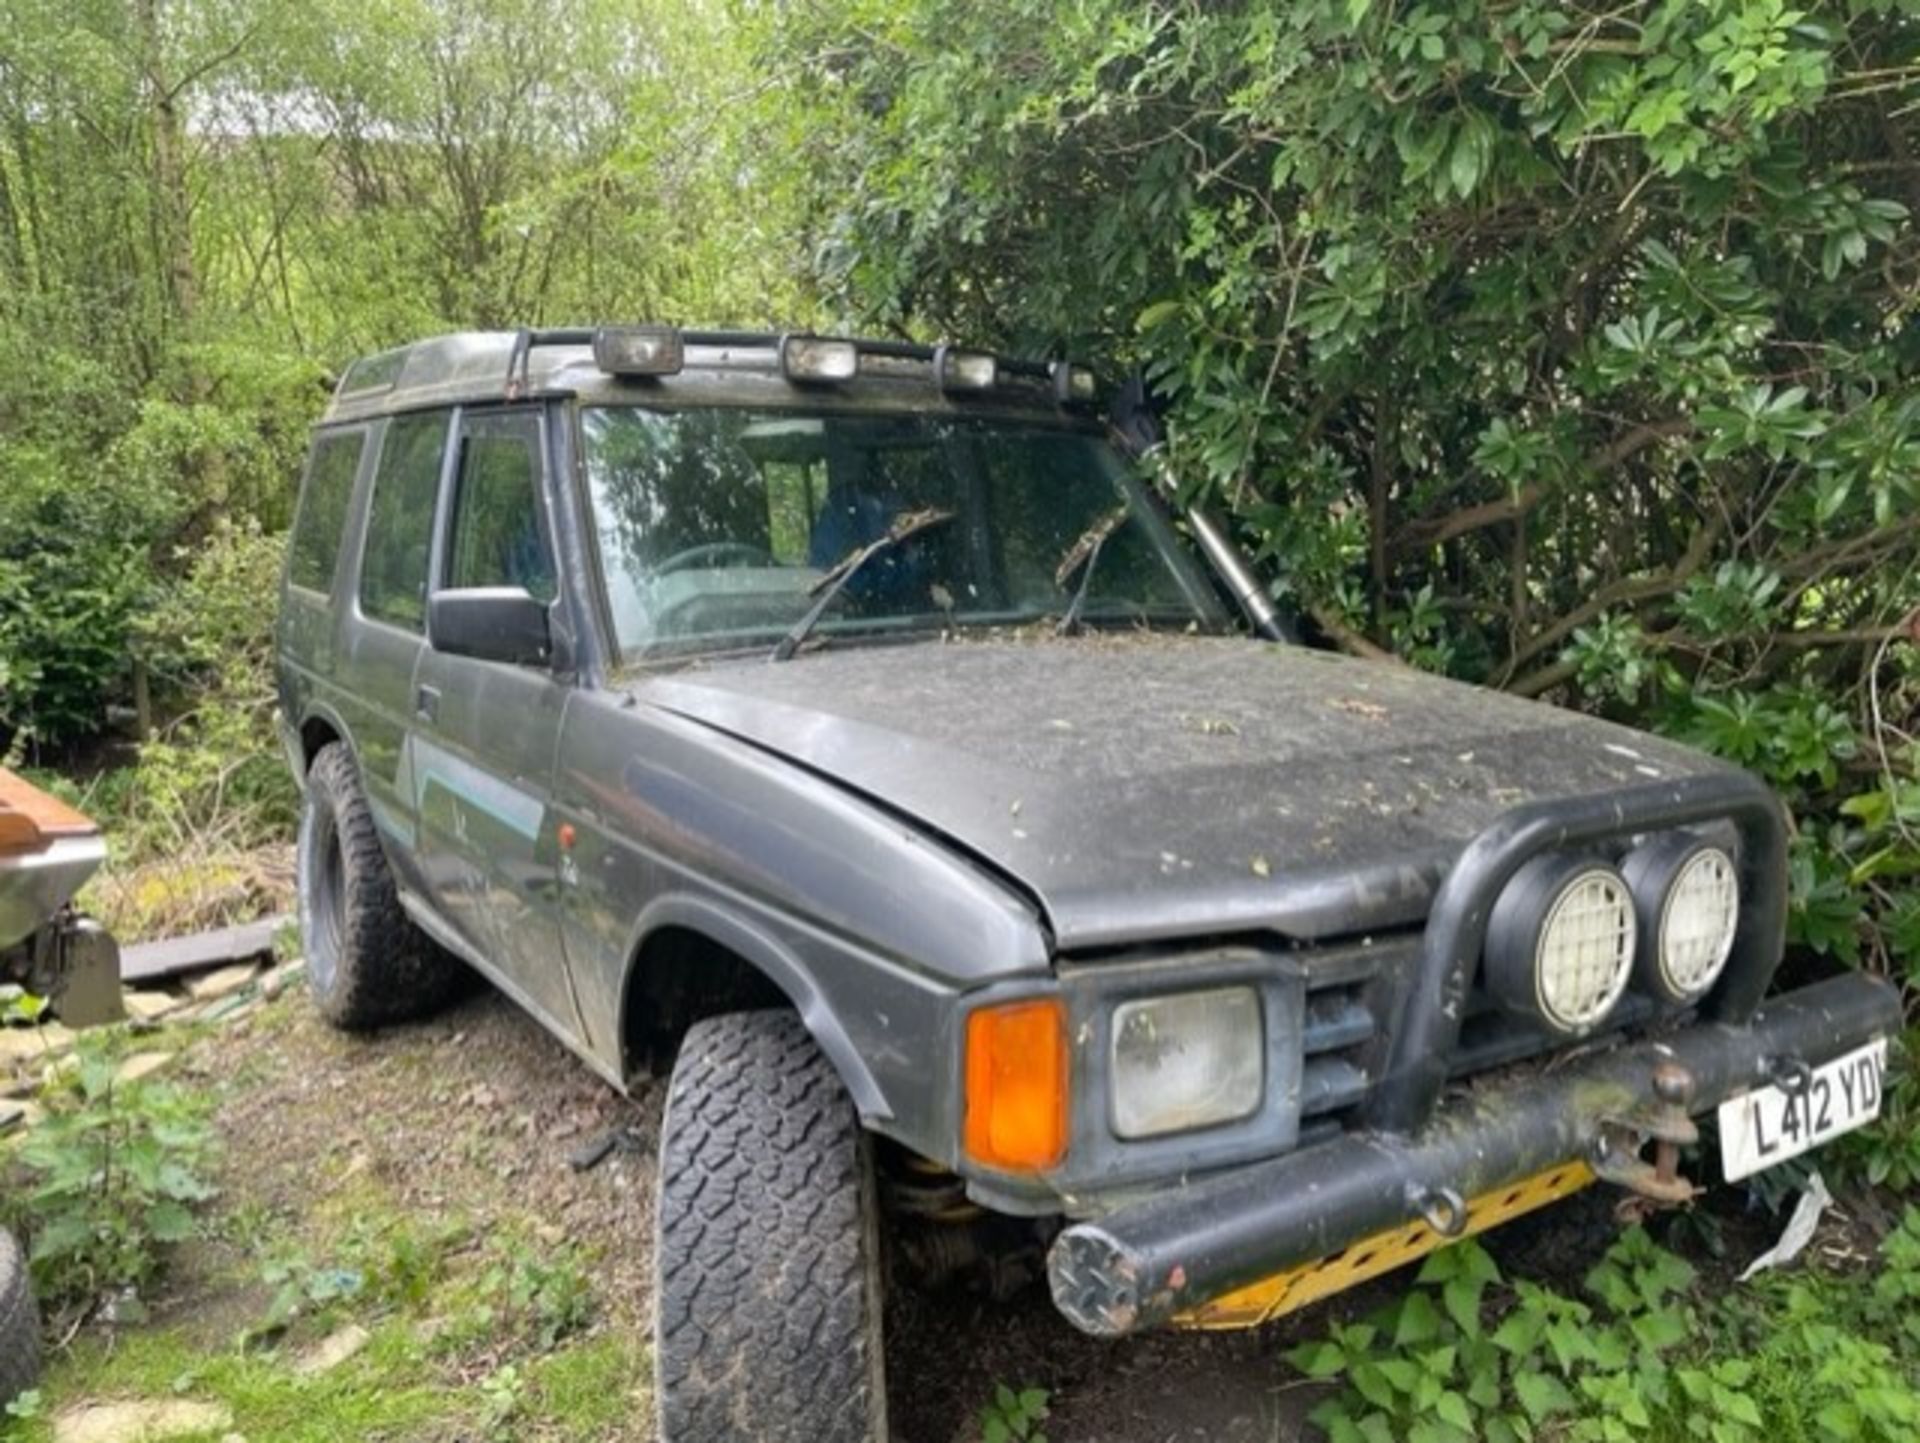 Off road machine Land Rover discovery, original series 1 bodywork, 2 doors , 1 high suspension - Image 4 of 8